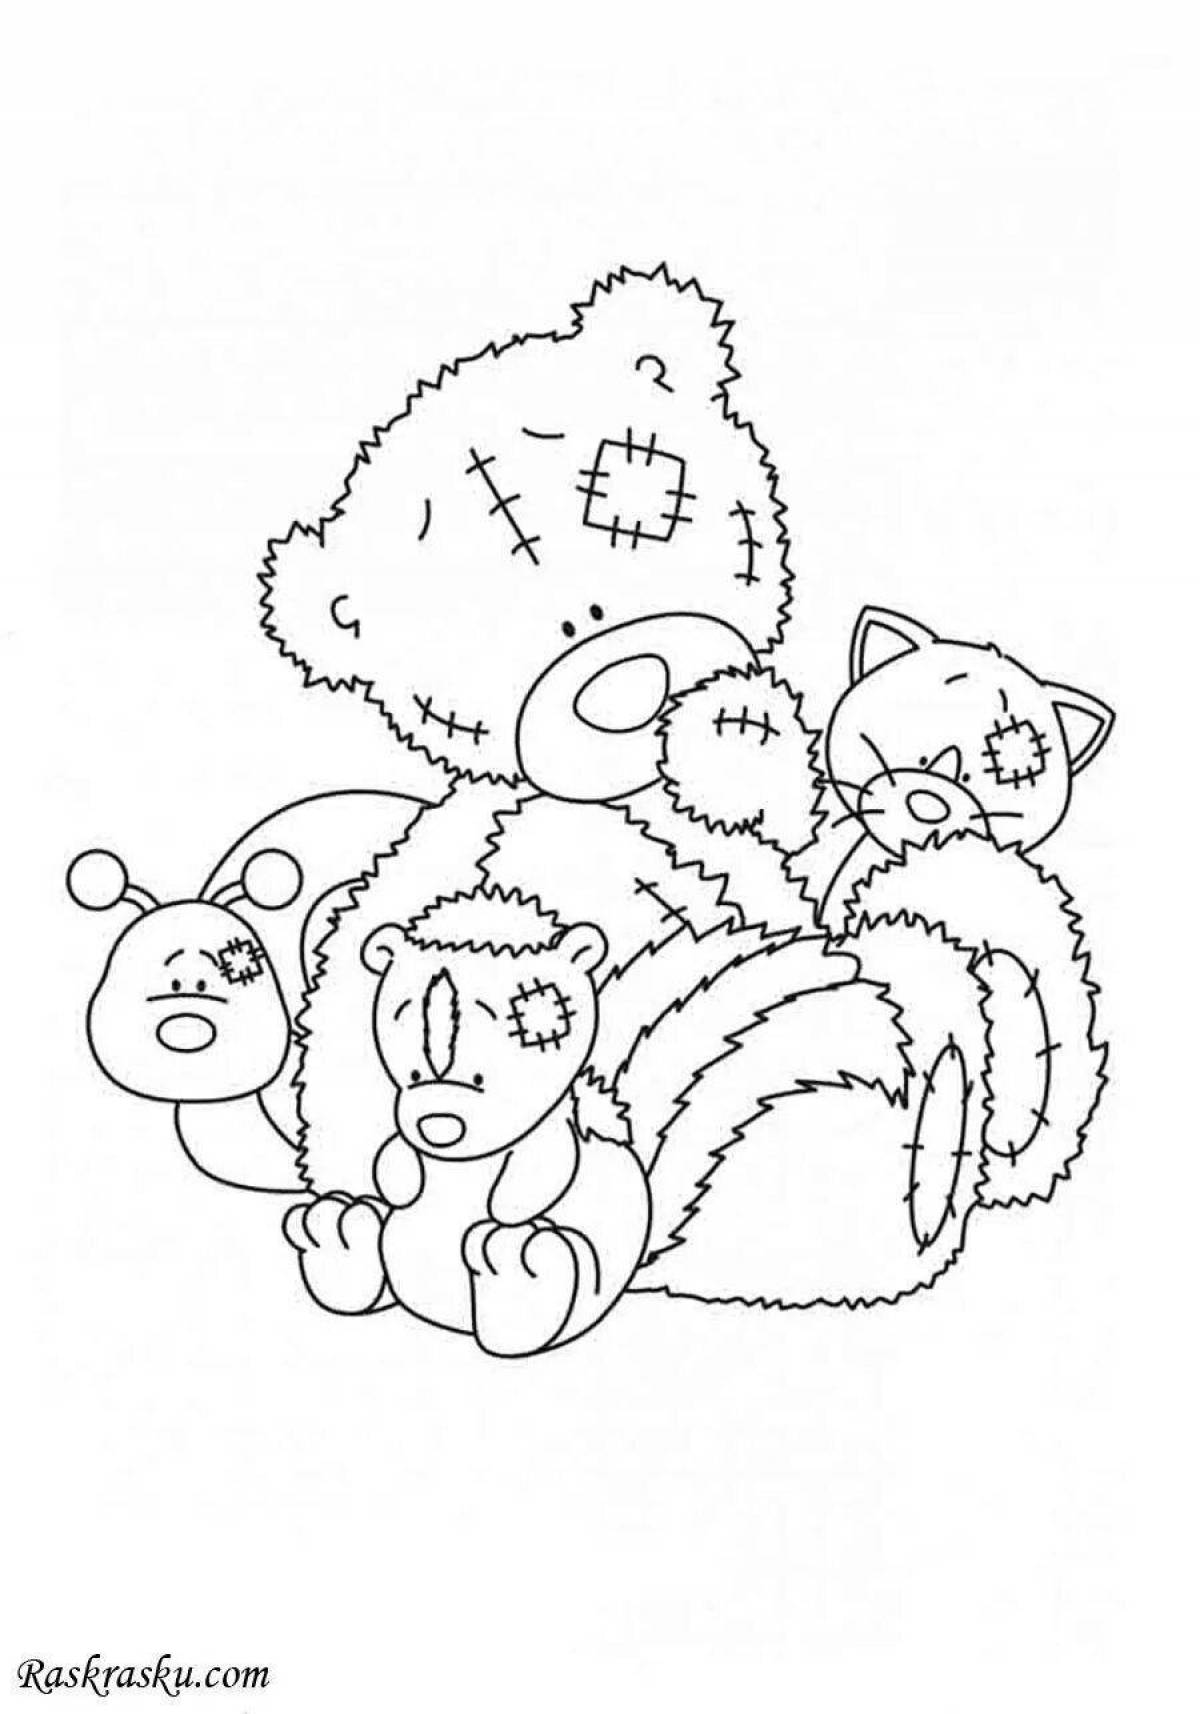 Teddy bear hugging coloring page